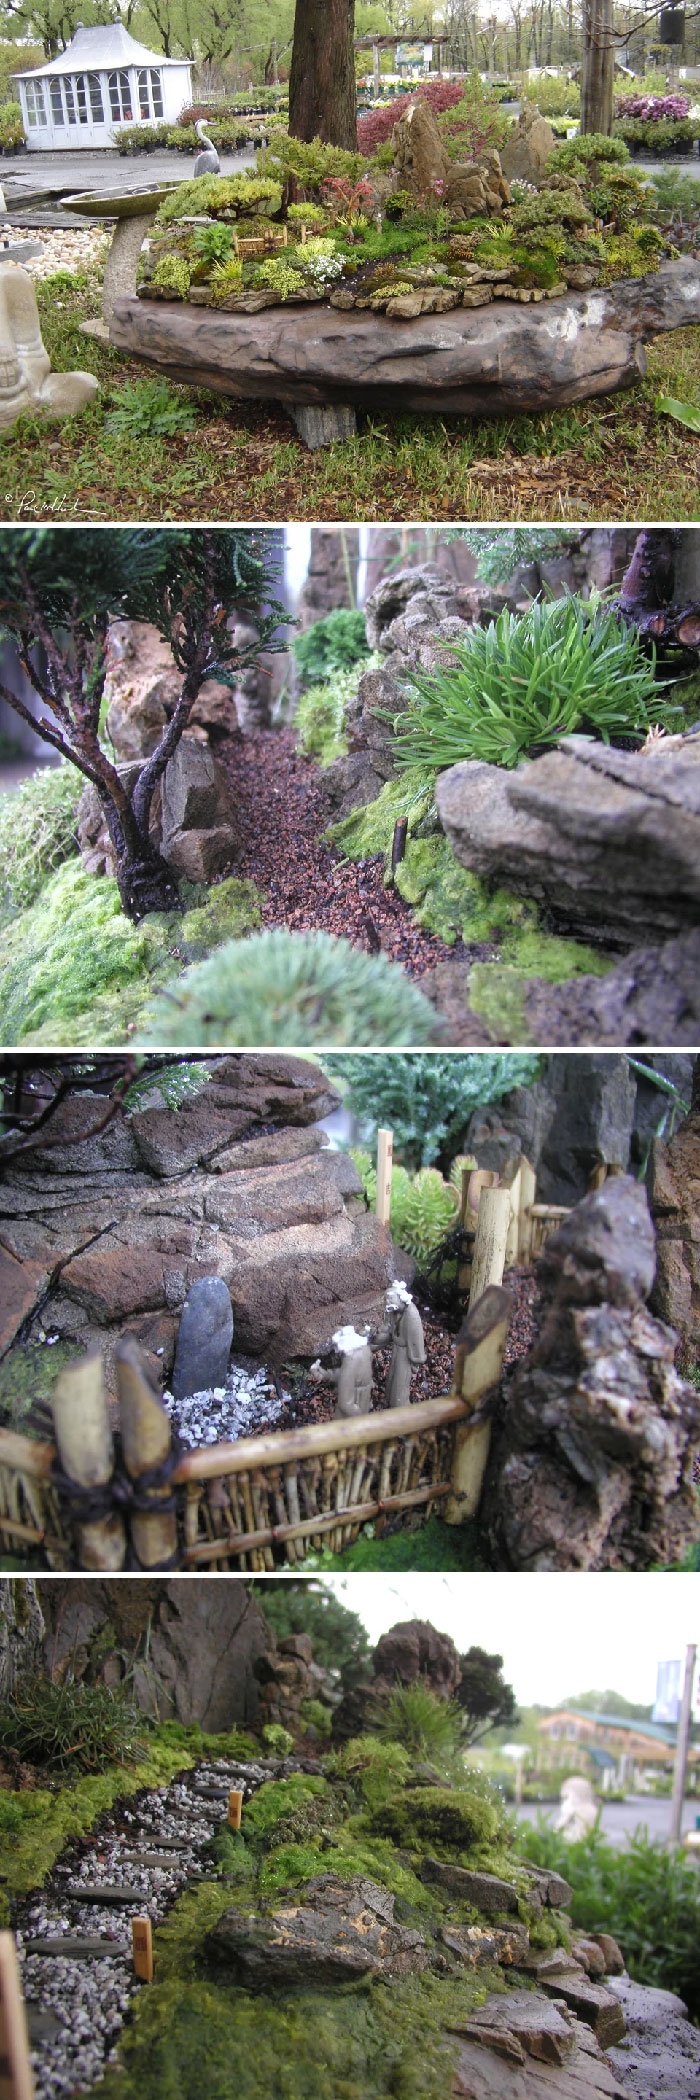 This Is A Children's Faerie Garden I Planted A Few Years Ago. It Lives On A 5 Foot Boulder, Has A Variety Of Evergreen And Deciduous Trees And Ground Covers, Mosses And Succulents. It's A Miniature Living Ecosystem That Goes Dormant In Winter And Is Home To Bees, Birds, Butterflies, Beetles And Fae